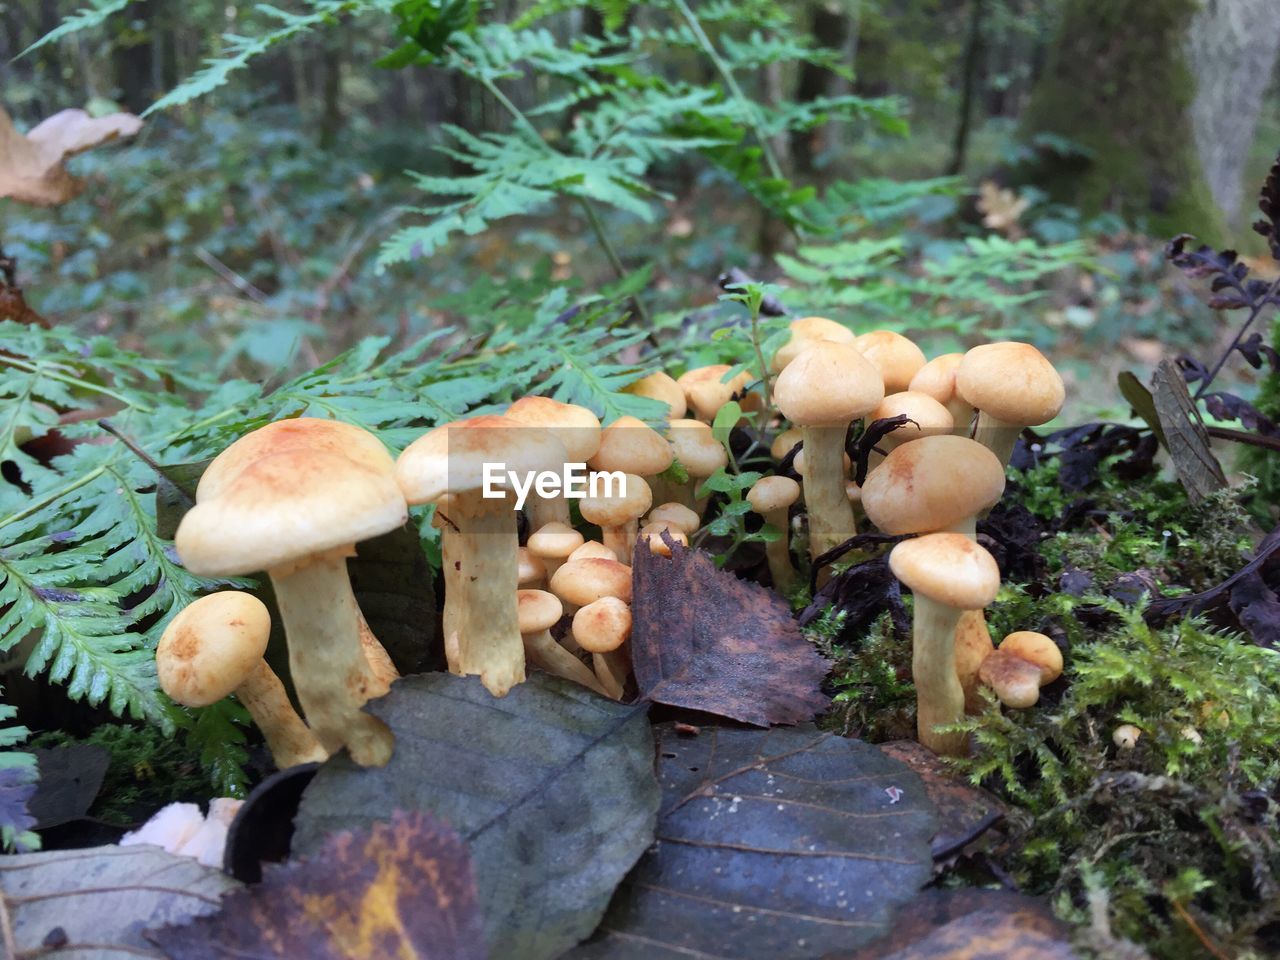 MUSHROOMS GROWING IN FOREST